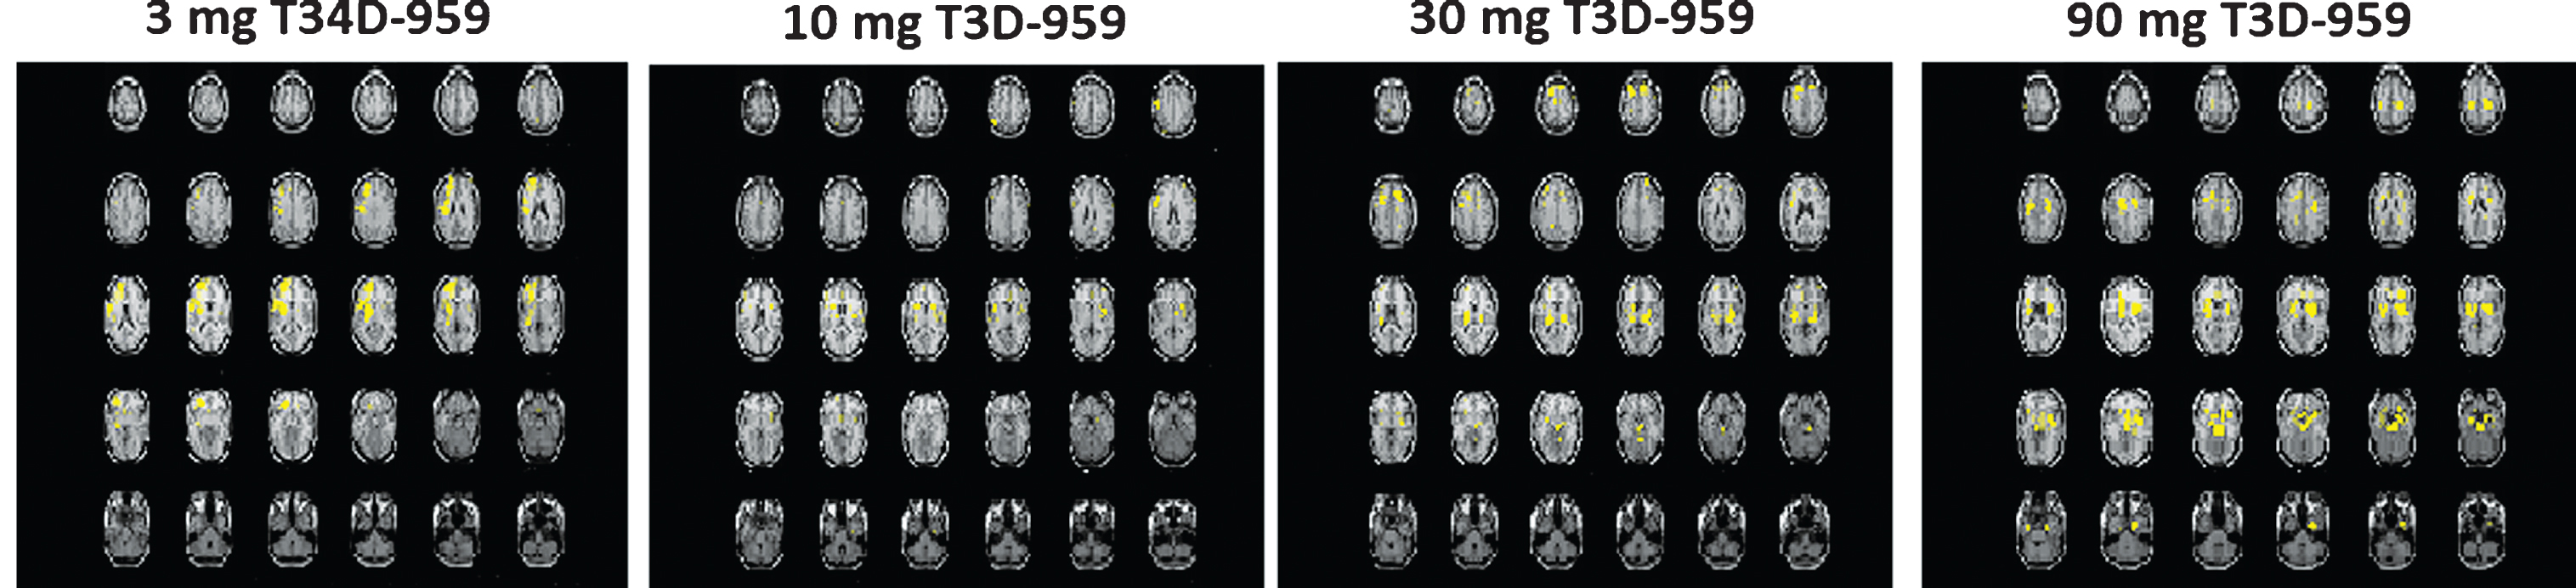 Regions of Statistically Significant Differences (ROSDs) with Positive Δ R CMRgl (EOT-BL) Relative to Whole Brain (p < 0.005) for the four dose groups. Voxel-wise SPM Analysis. Yellow regions (ROSD) represent voxels with statistically significant increases from baseline (BL) to end of treatment (EOT) (positive ΔR CMRgl (EOT – BL)>0, p = 0.005). ROSDs are defined as brain regions where Δ R CMRgl = [voxeli(EOT) / RRave (EOT)] – >0 or <0, with a p value < 0.005 across a dose group. ROSDs are referred to as positive (Δ R CMRgl>0) or negative (Δ R CMRgl<0) ROSDs, and are strictly spatial regions, shown as yellow regions in the image displays. The spatial extent of an ROSD can be quantified by the number of voxels in an ROSD.